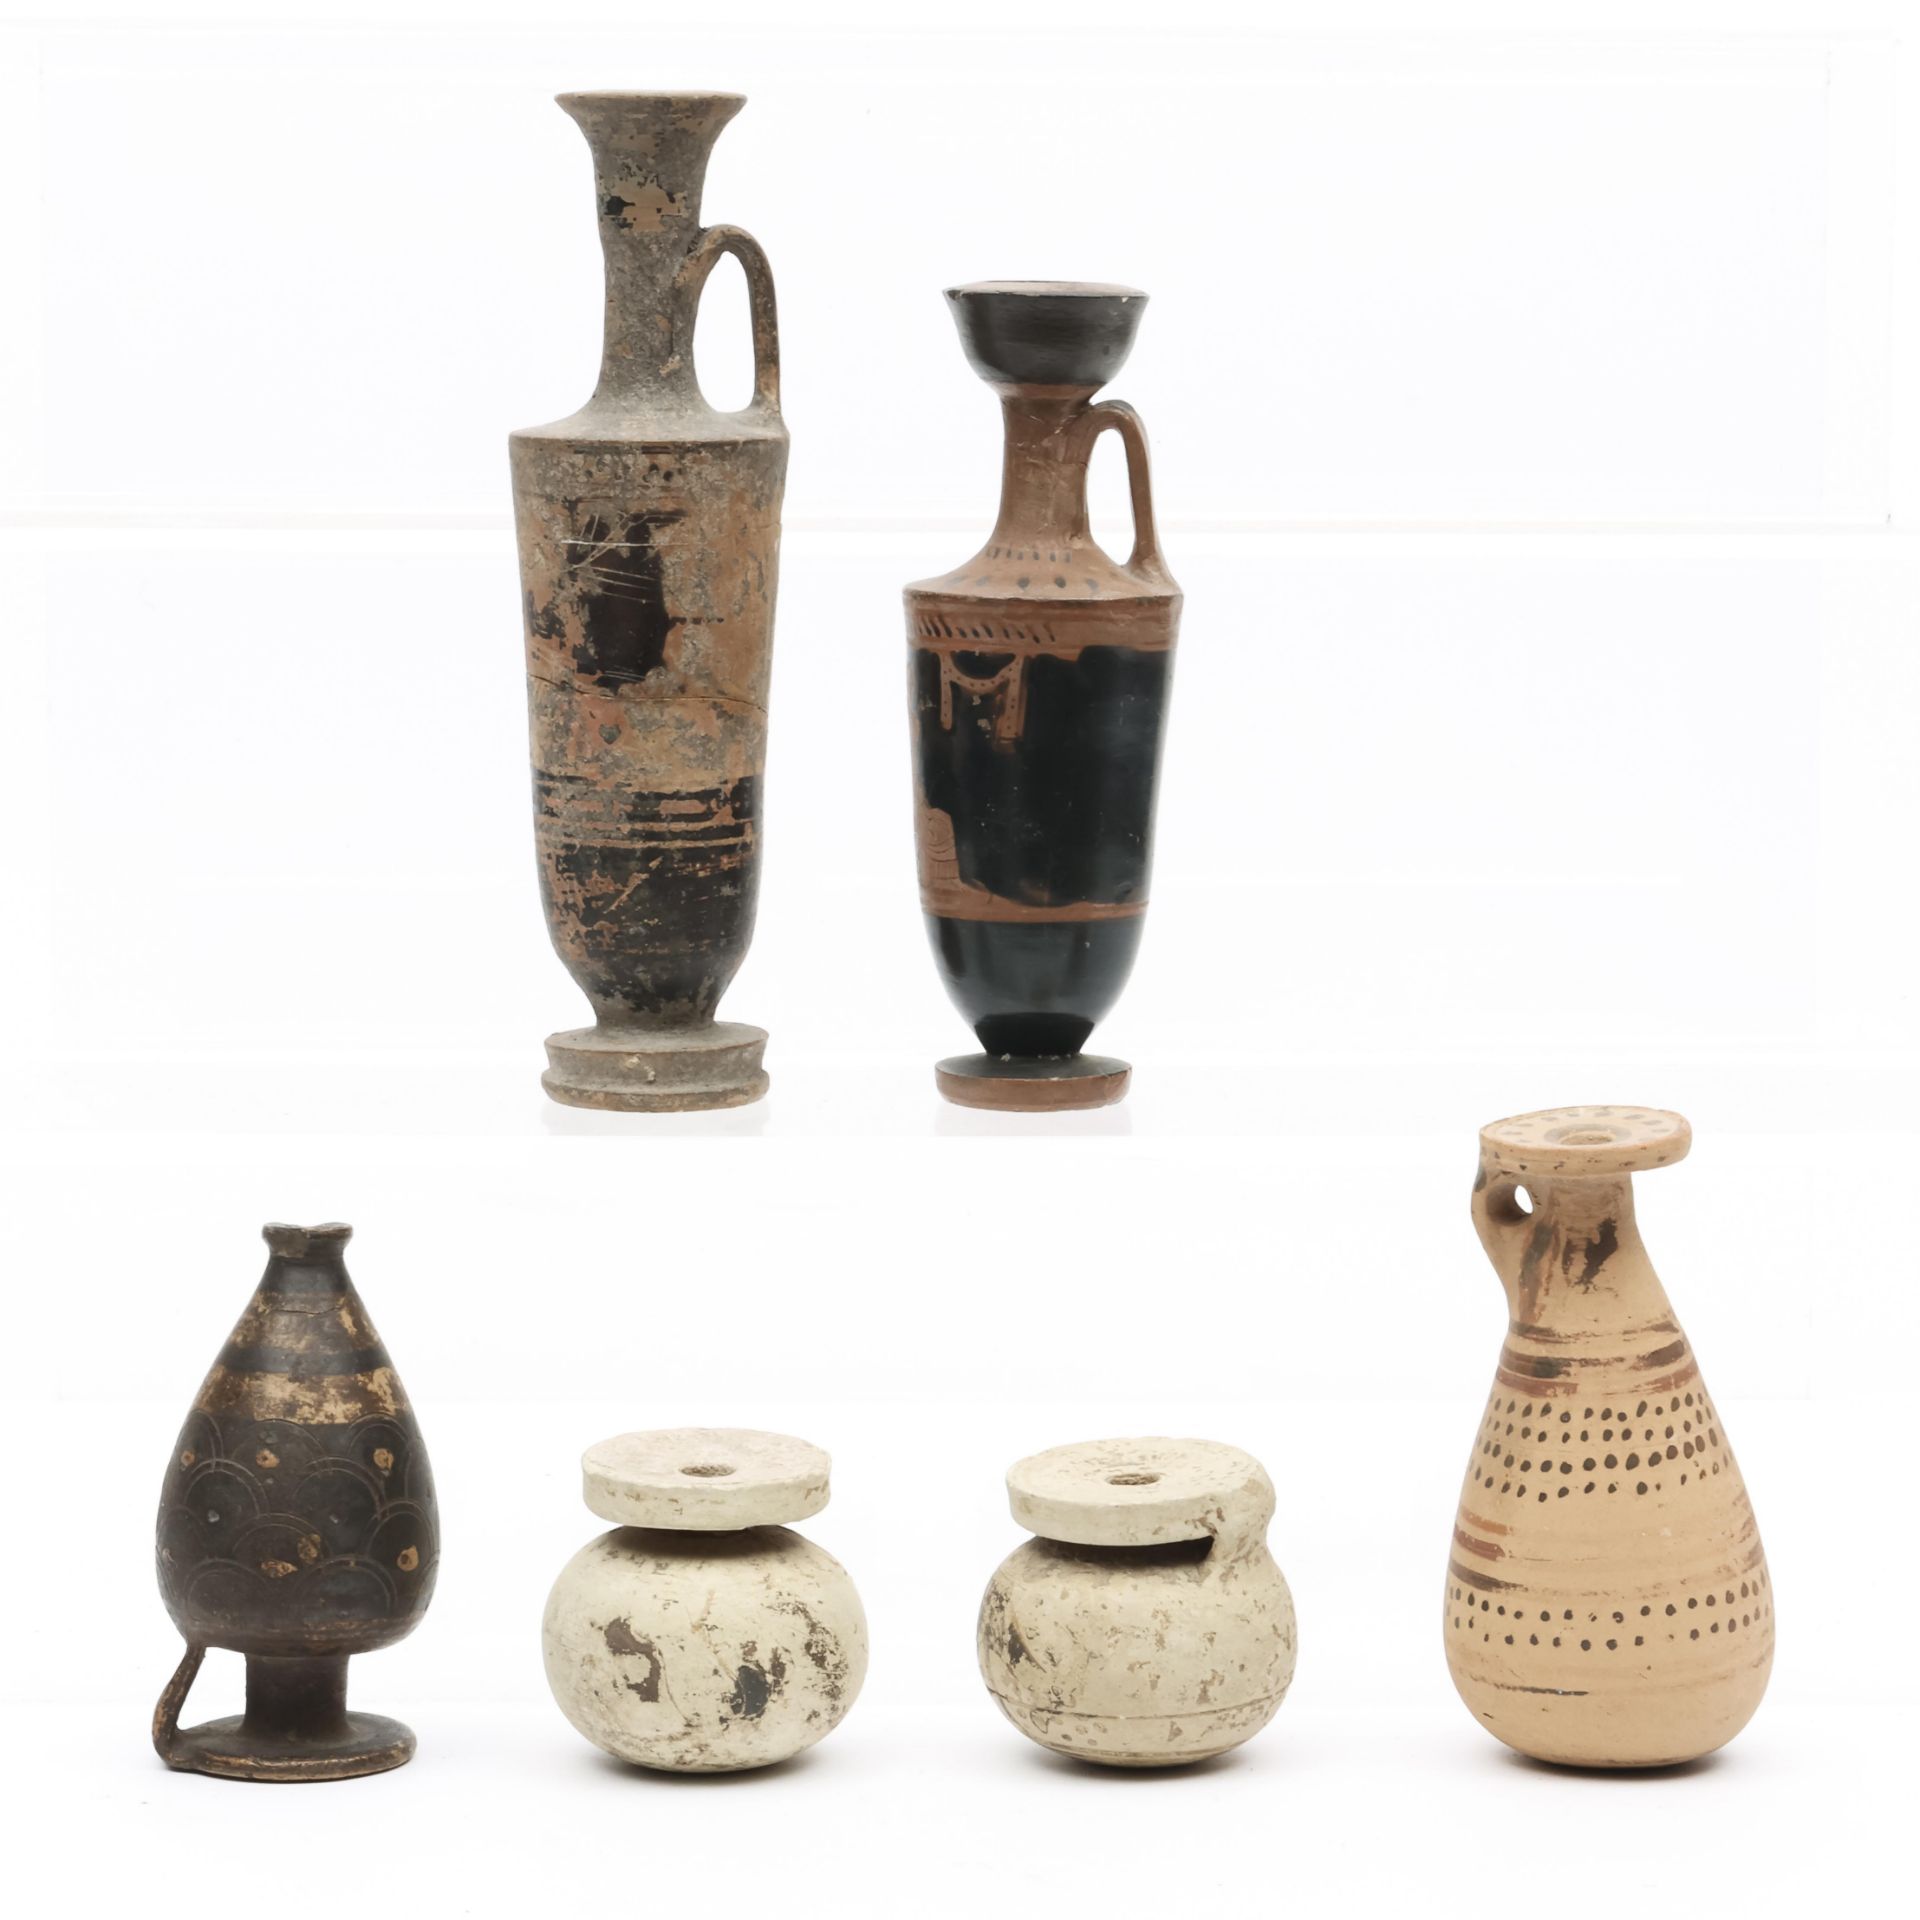 A collection of six Greek terracotta vases, 5th-4th century BC; - Image 3 of 4